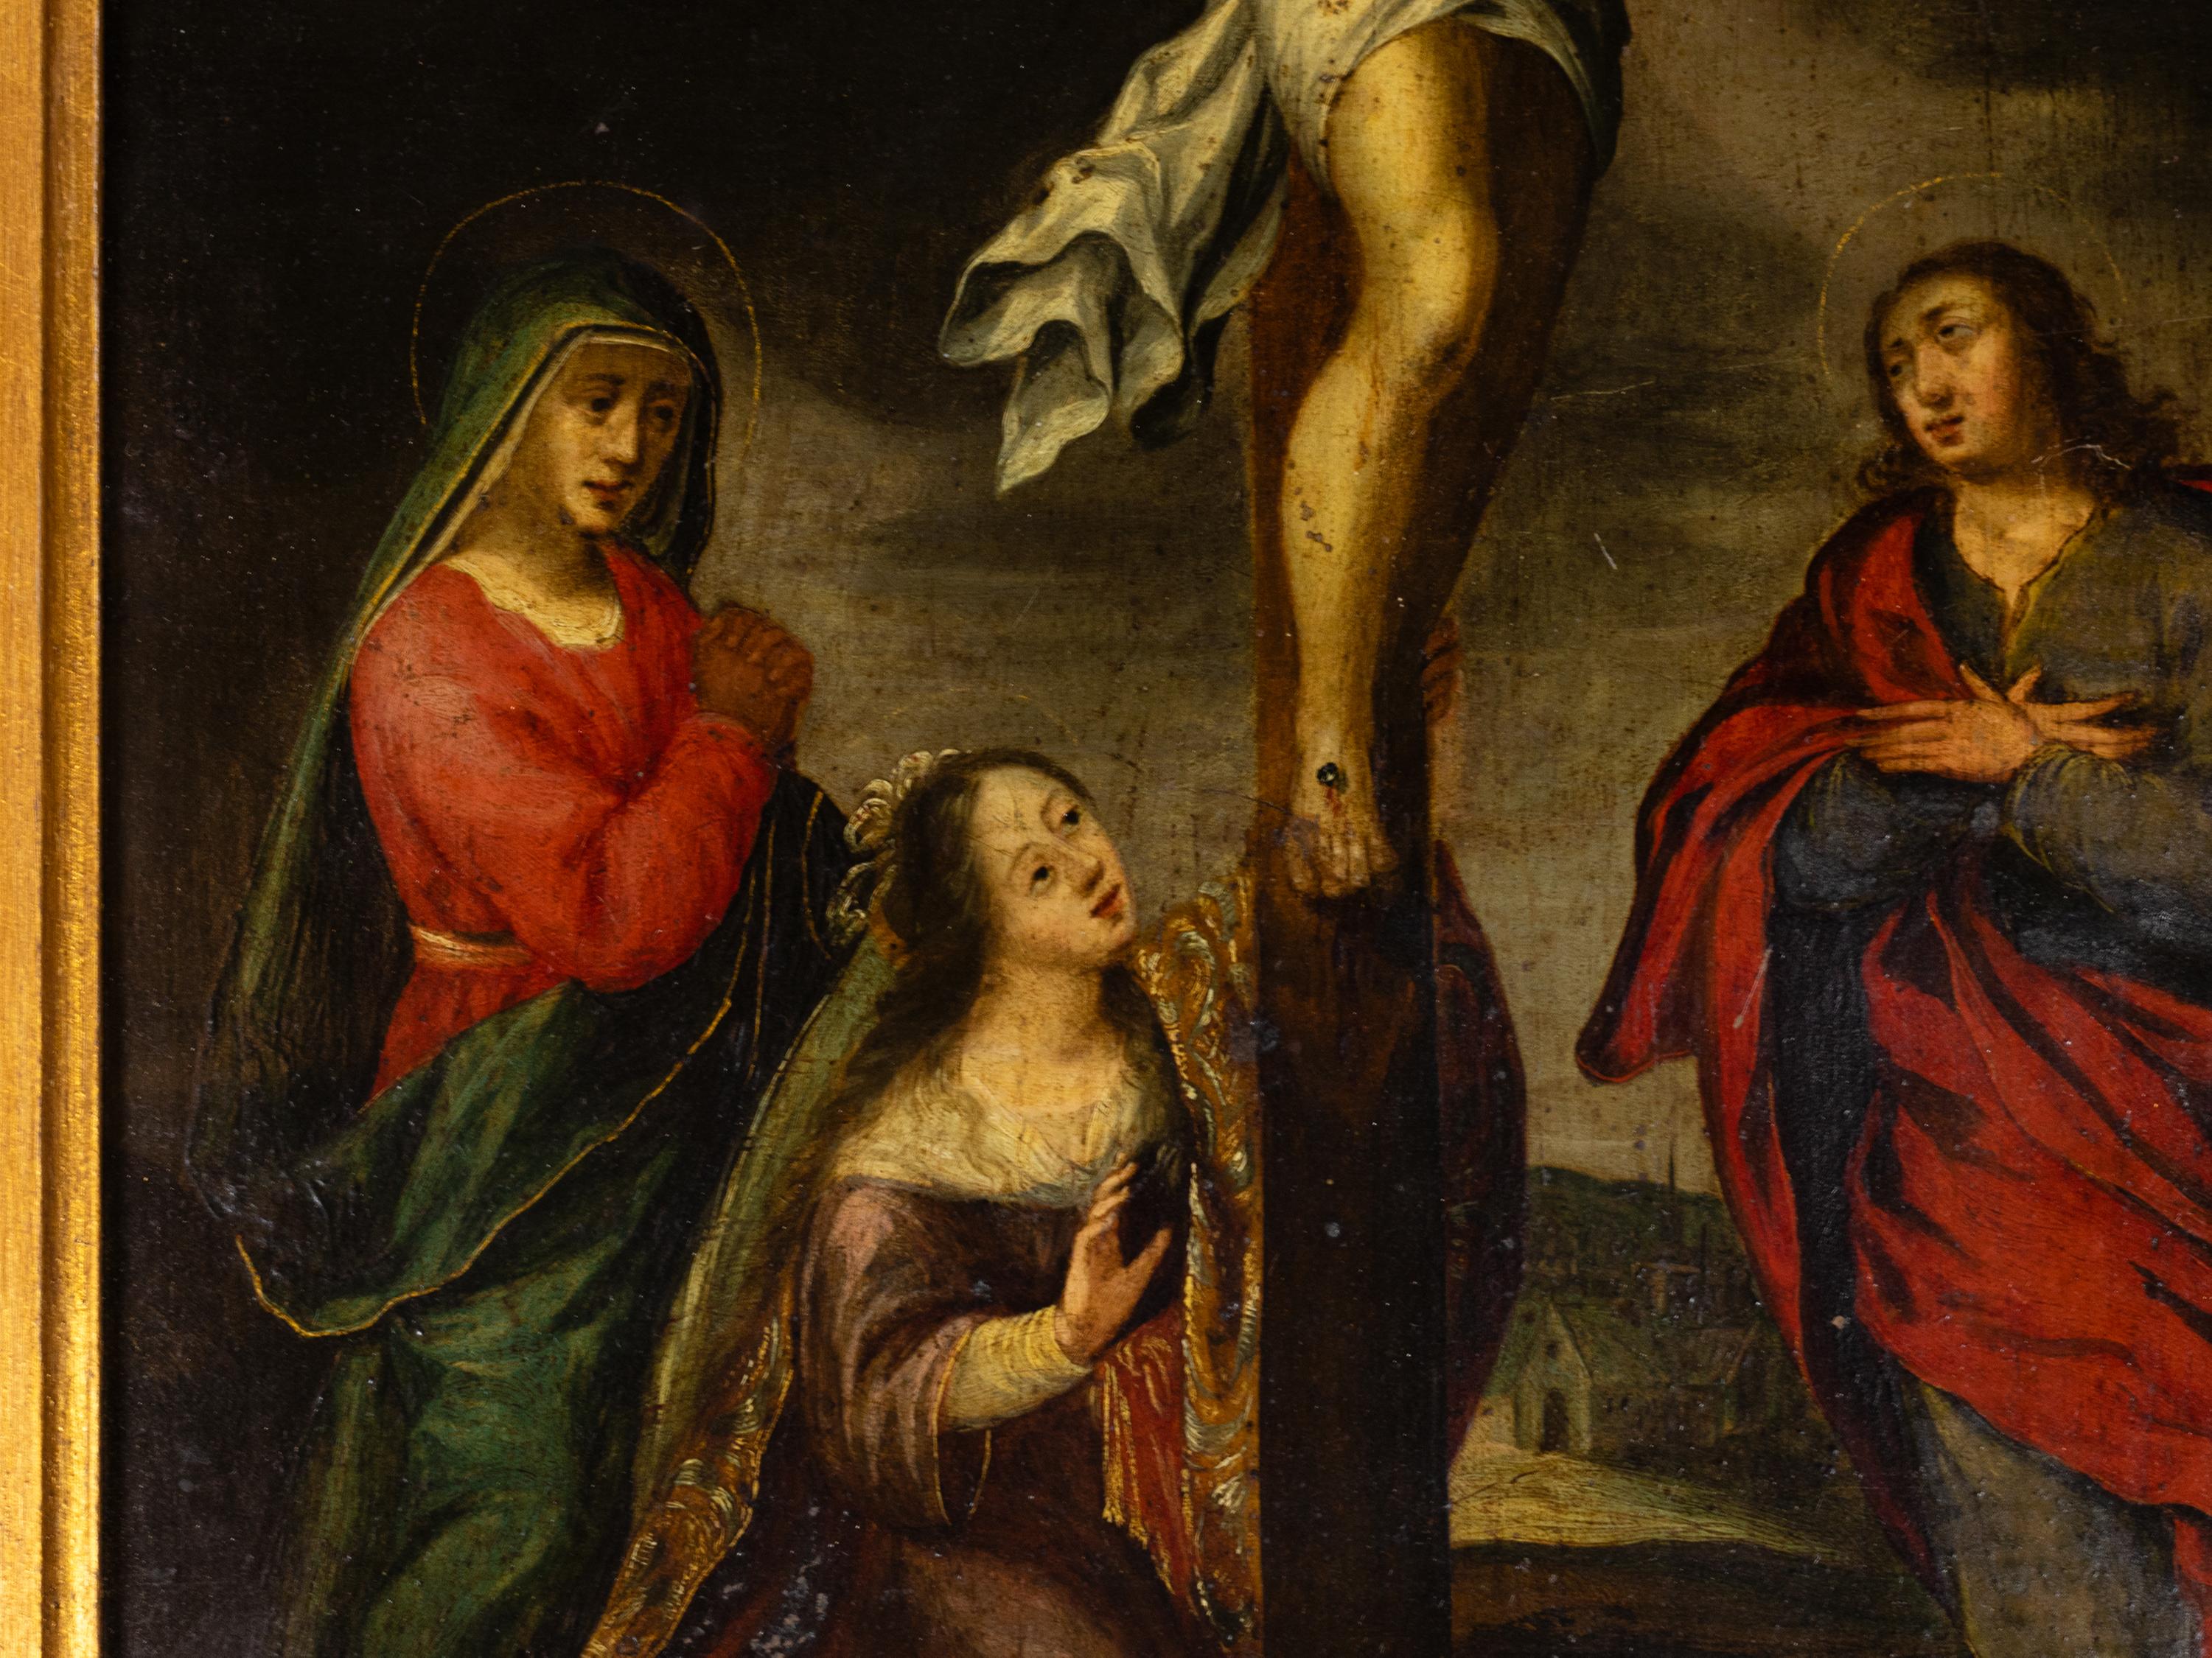 A 17th Century italian painting of Christ crucified accompanied by the three Marys: Mary Magdalene, Mary Salome and Mary of Cleophas in contemplation of His sacrifice, a motif inspired by the Flamish School. Frame 

Frame: 54 x 62 cm 
Without frame: